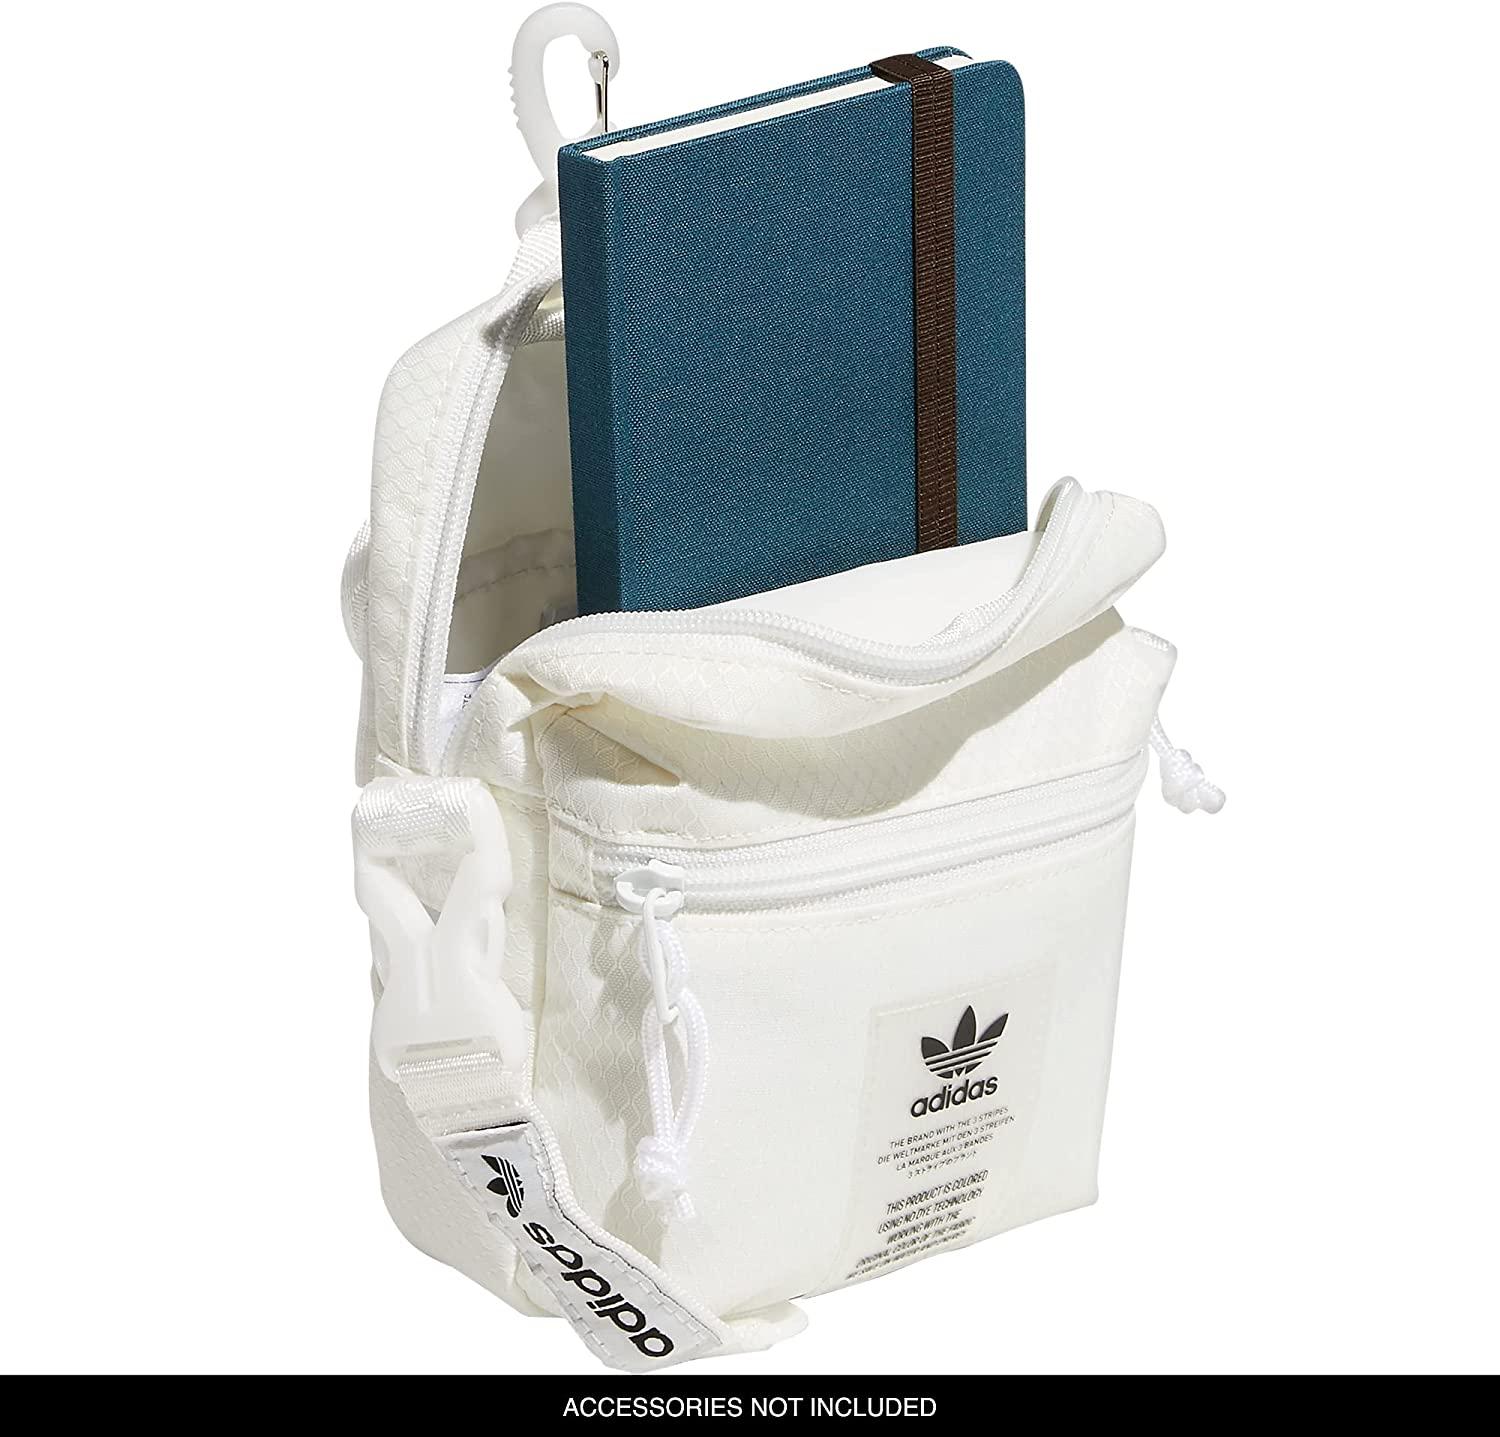  adidas Originals Utility Festival 3.0 Crossbody Bag, Off White/Better  Scarlet, One Size : Clothing, Shoes & Jewelry